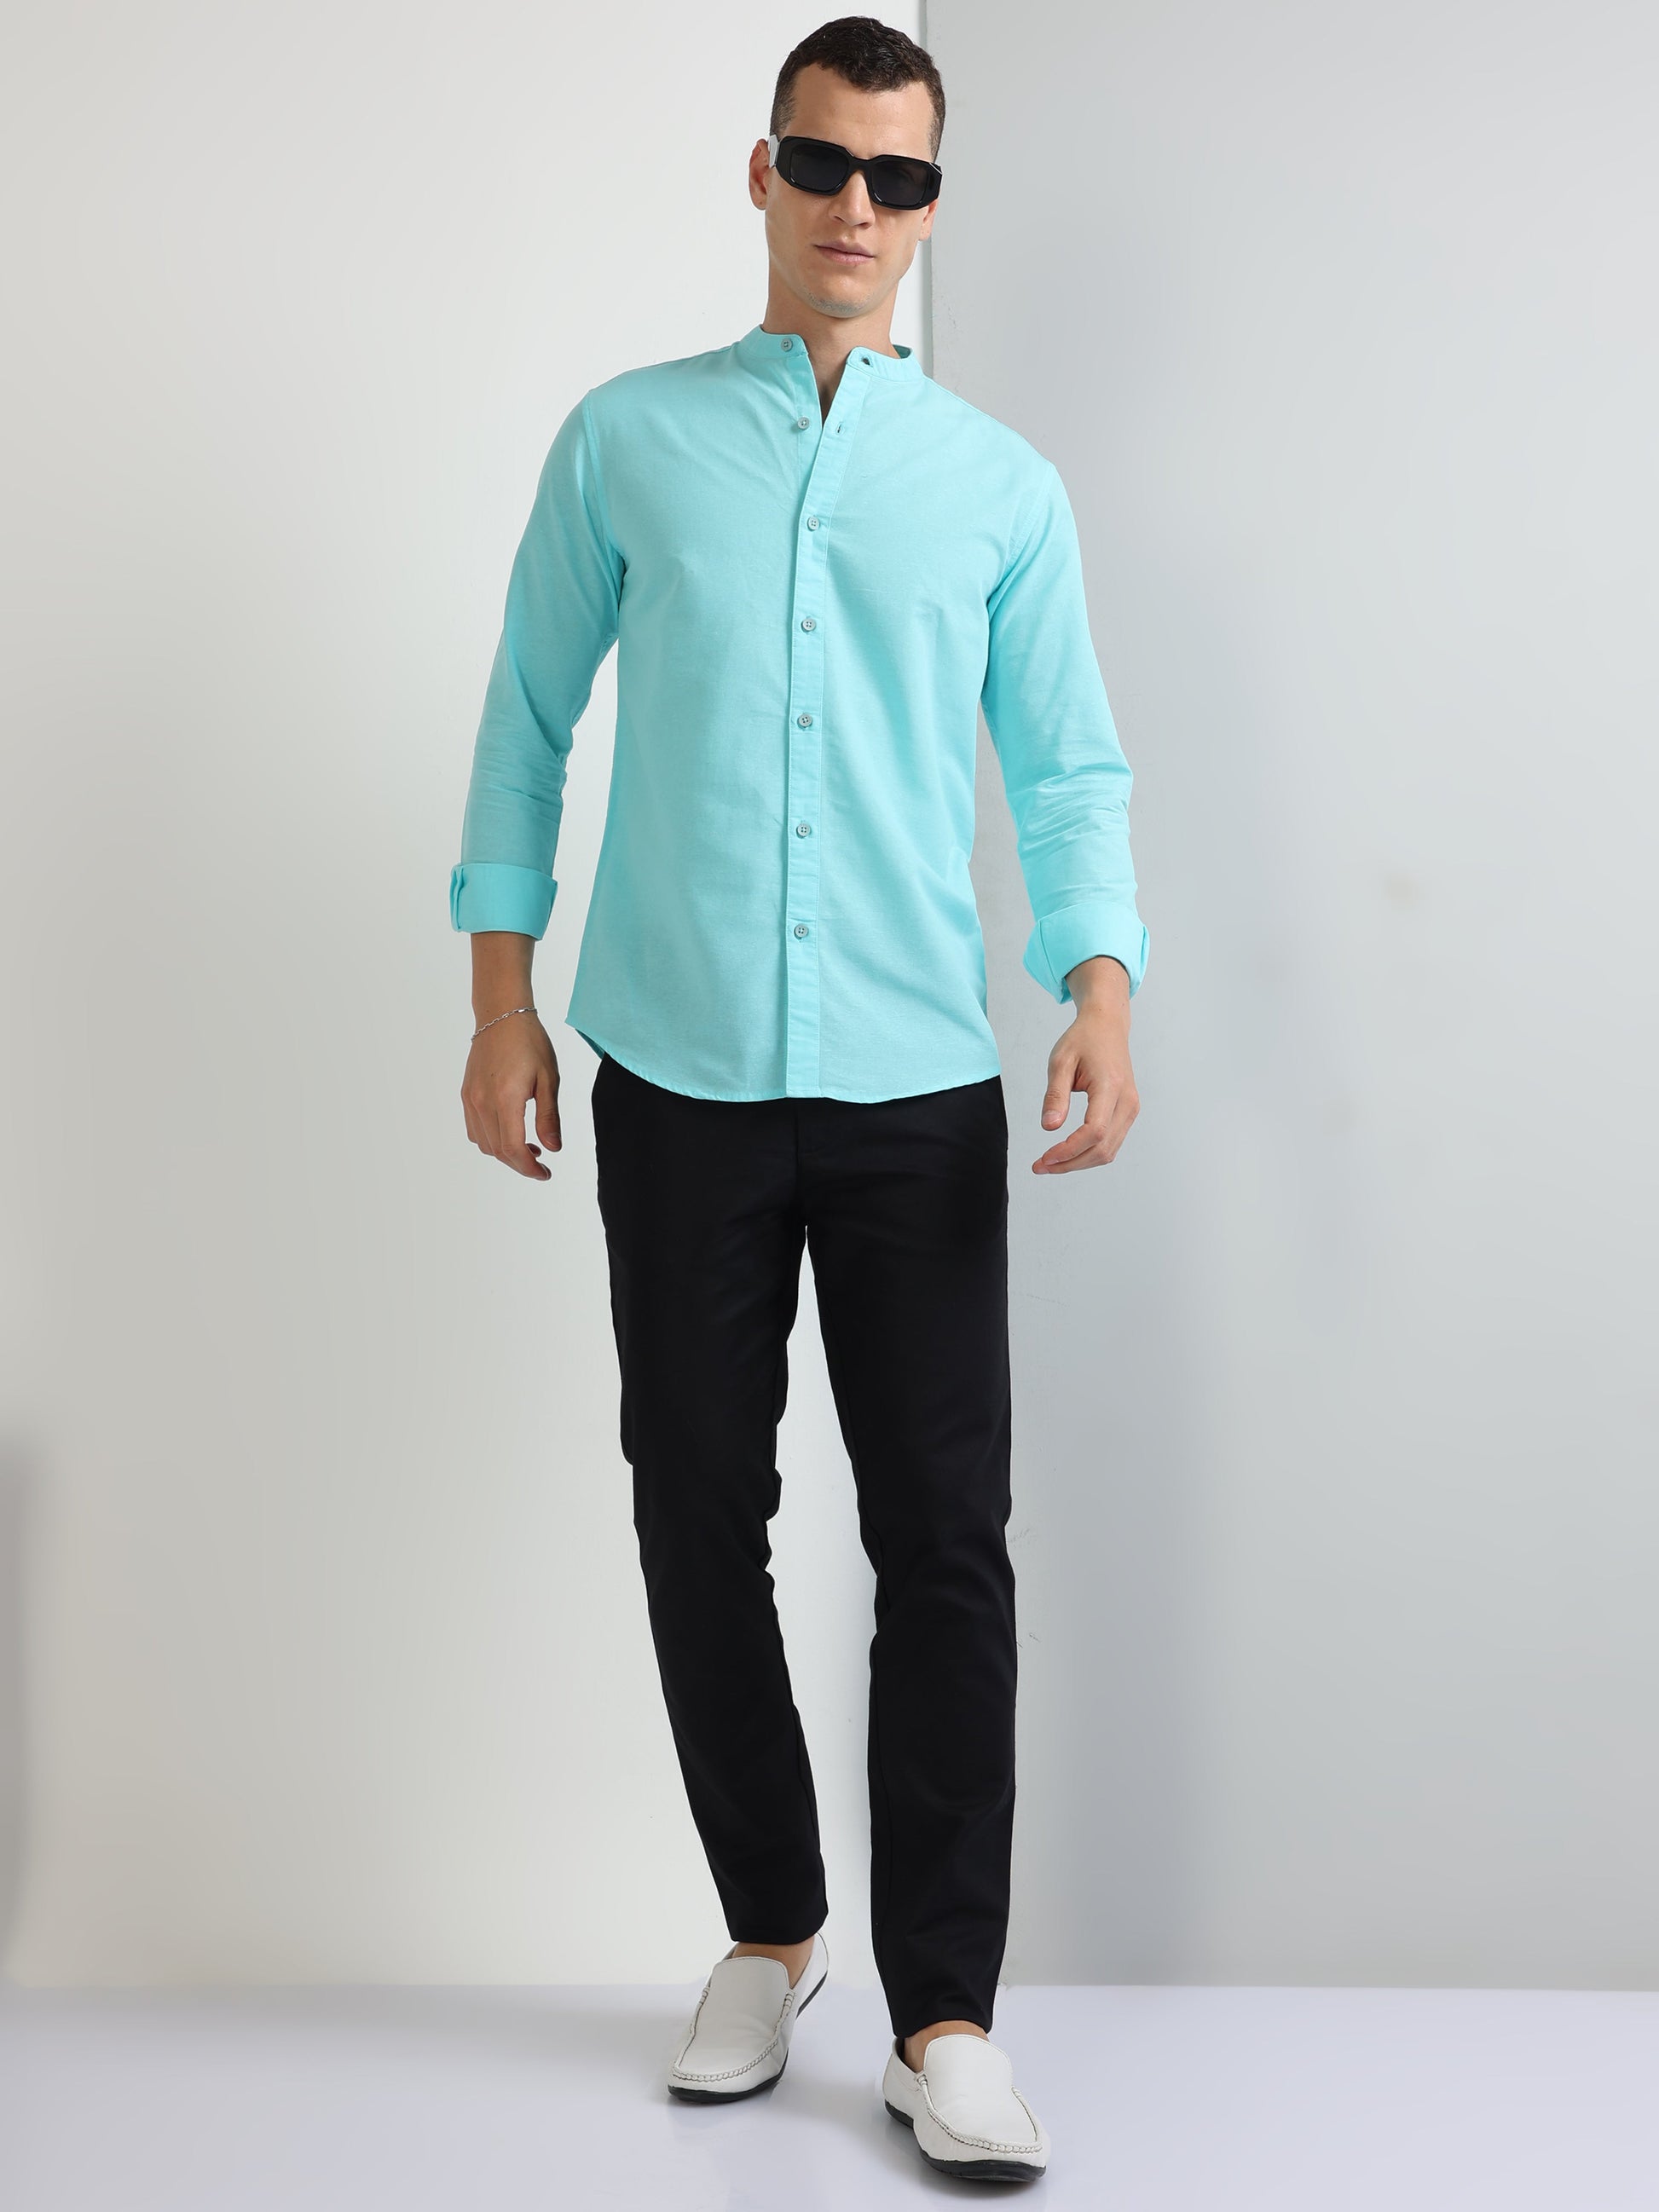 Buy No Pocket Chinese Collar Shirt For Mens Online.